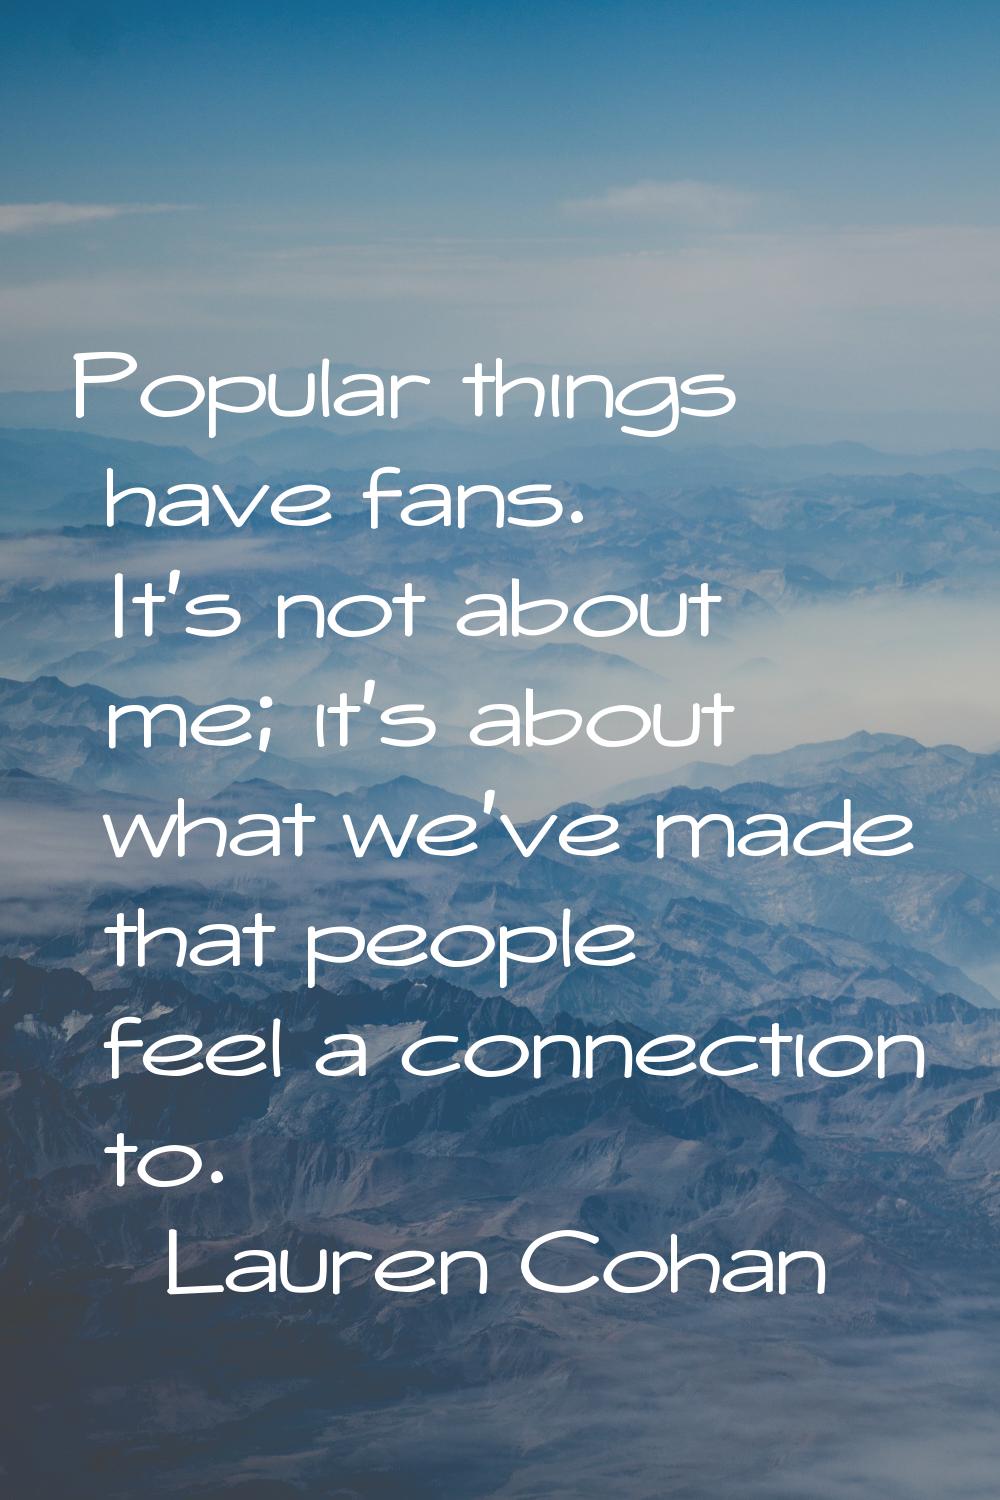 Popular things have fans. It's not about me; it's about what we've made that people feel a connecti